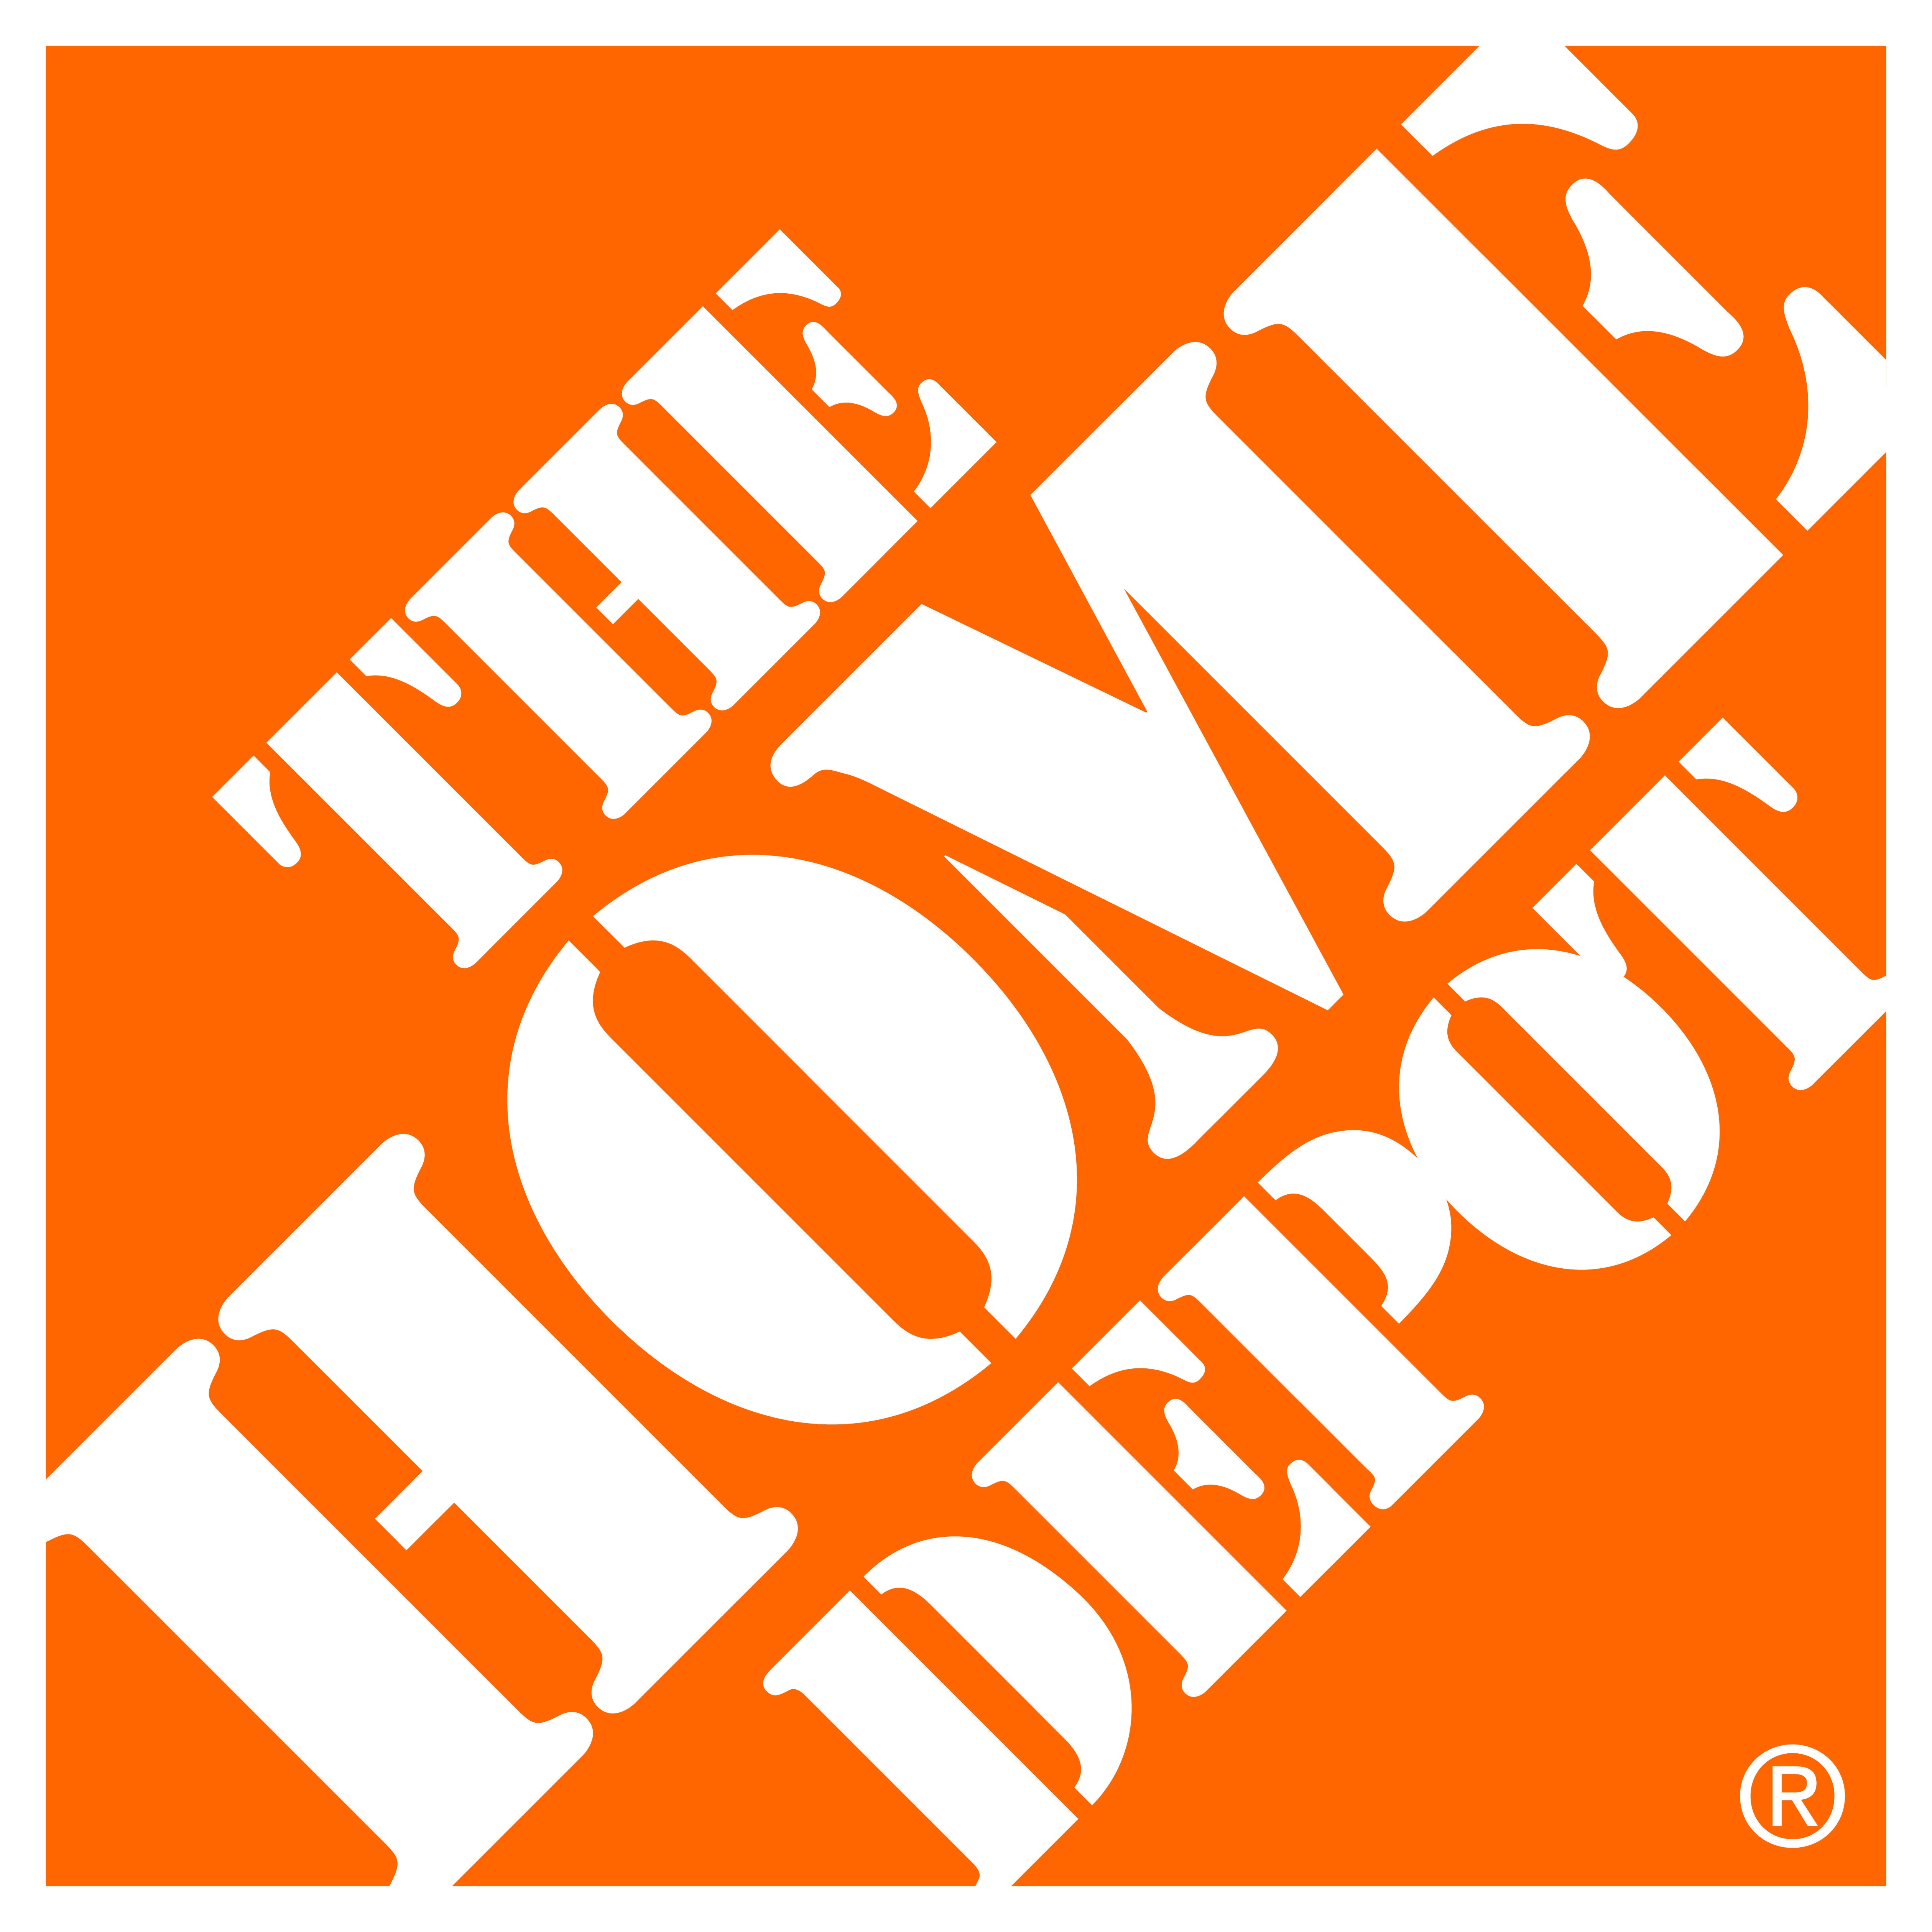 10% cash back Home Depot on select Chase cards up to $54! YMMV